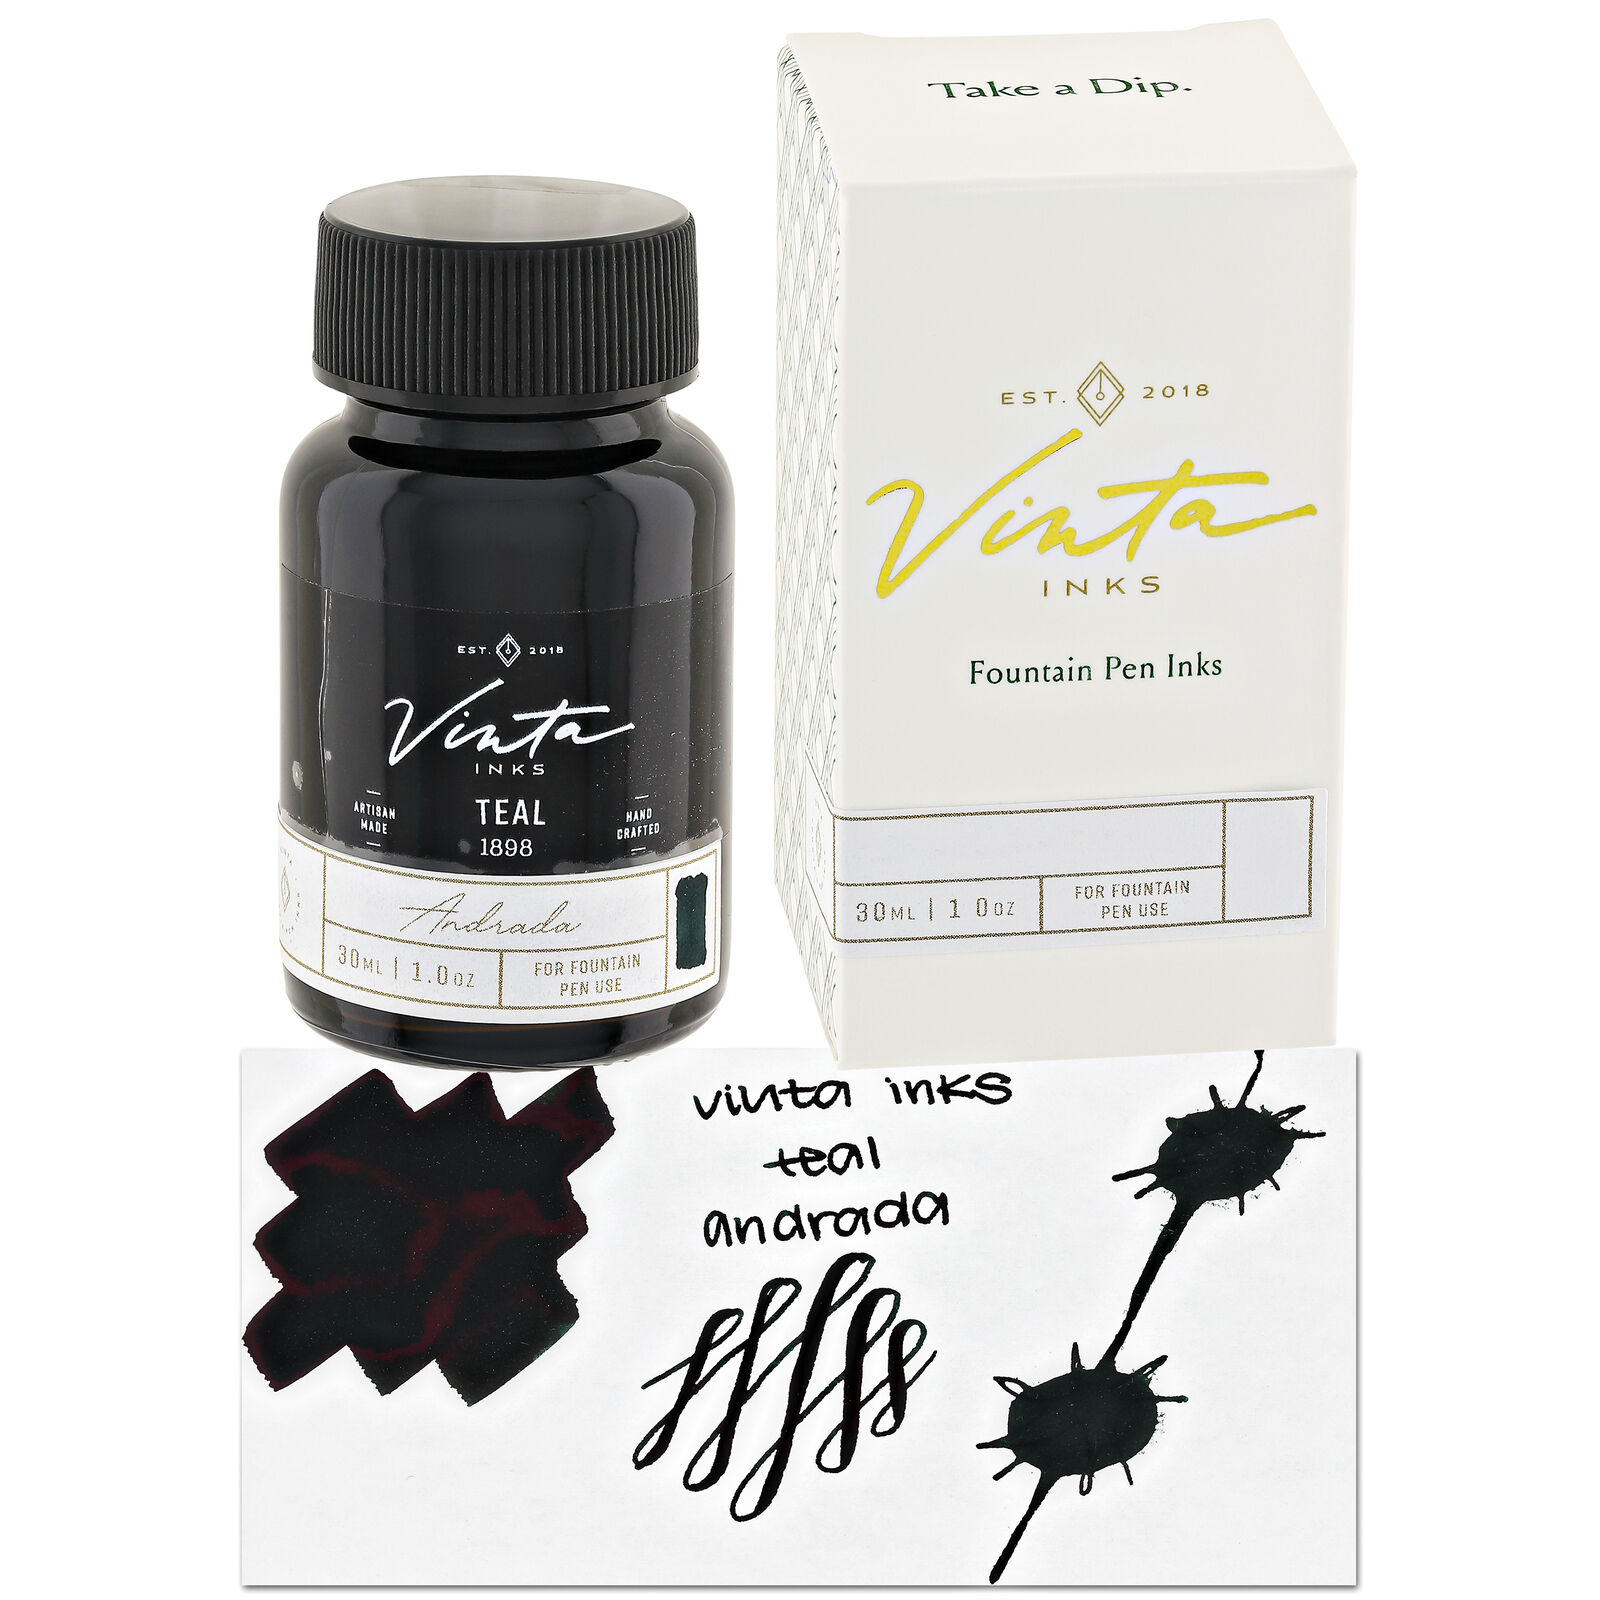 Vinta Inks 1.0 Bottled Ink for Fountain Pens in Teal [Andrada 1898] - 30mL NEW